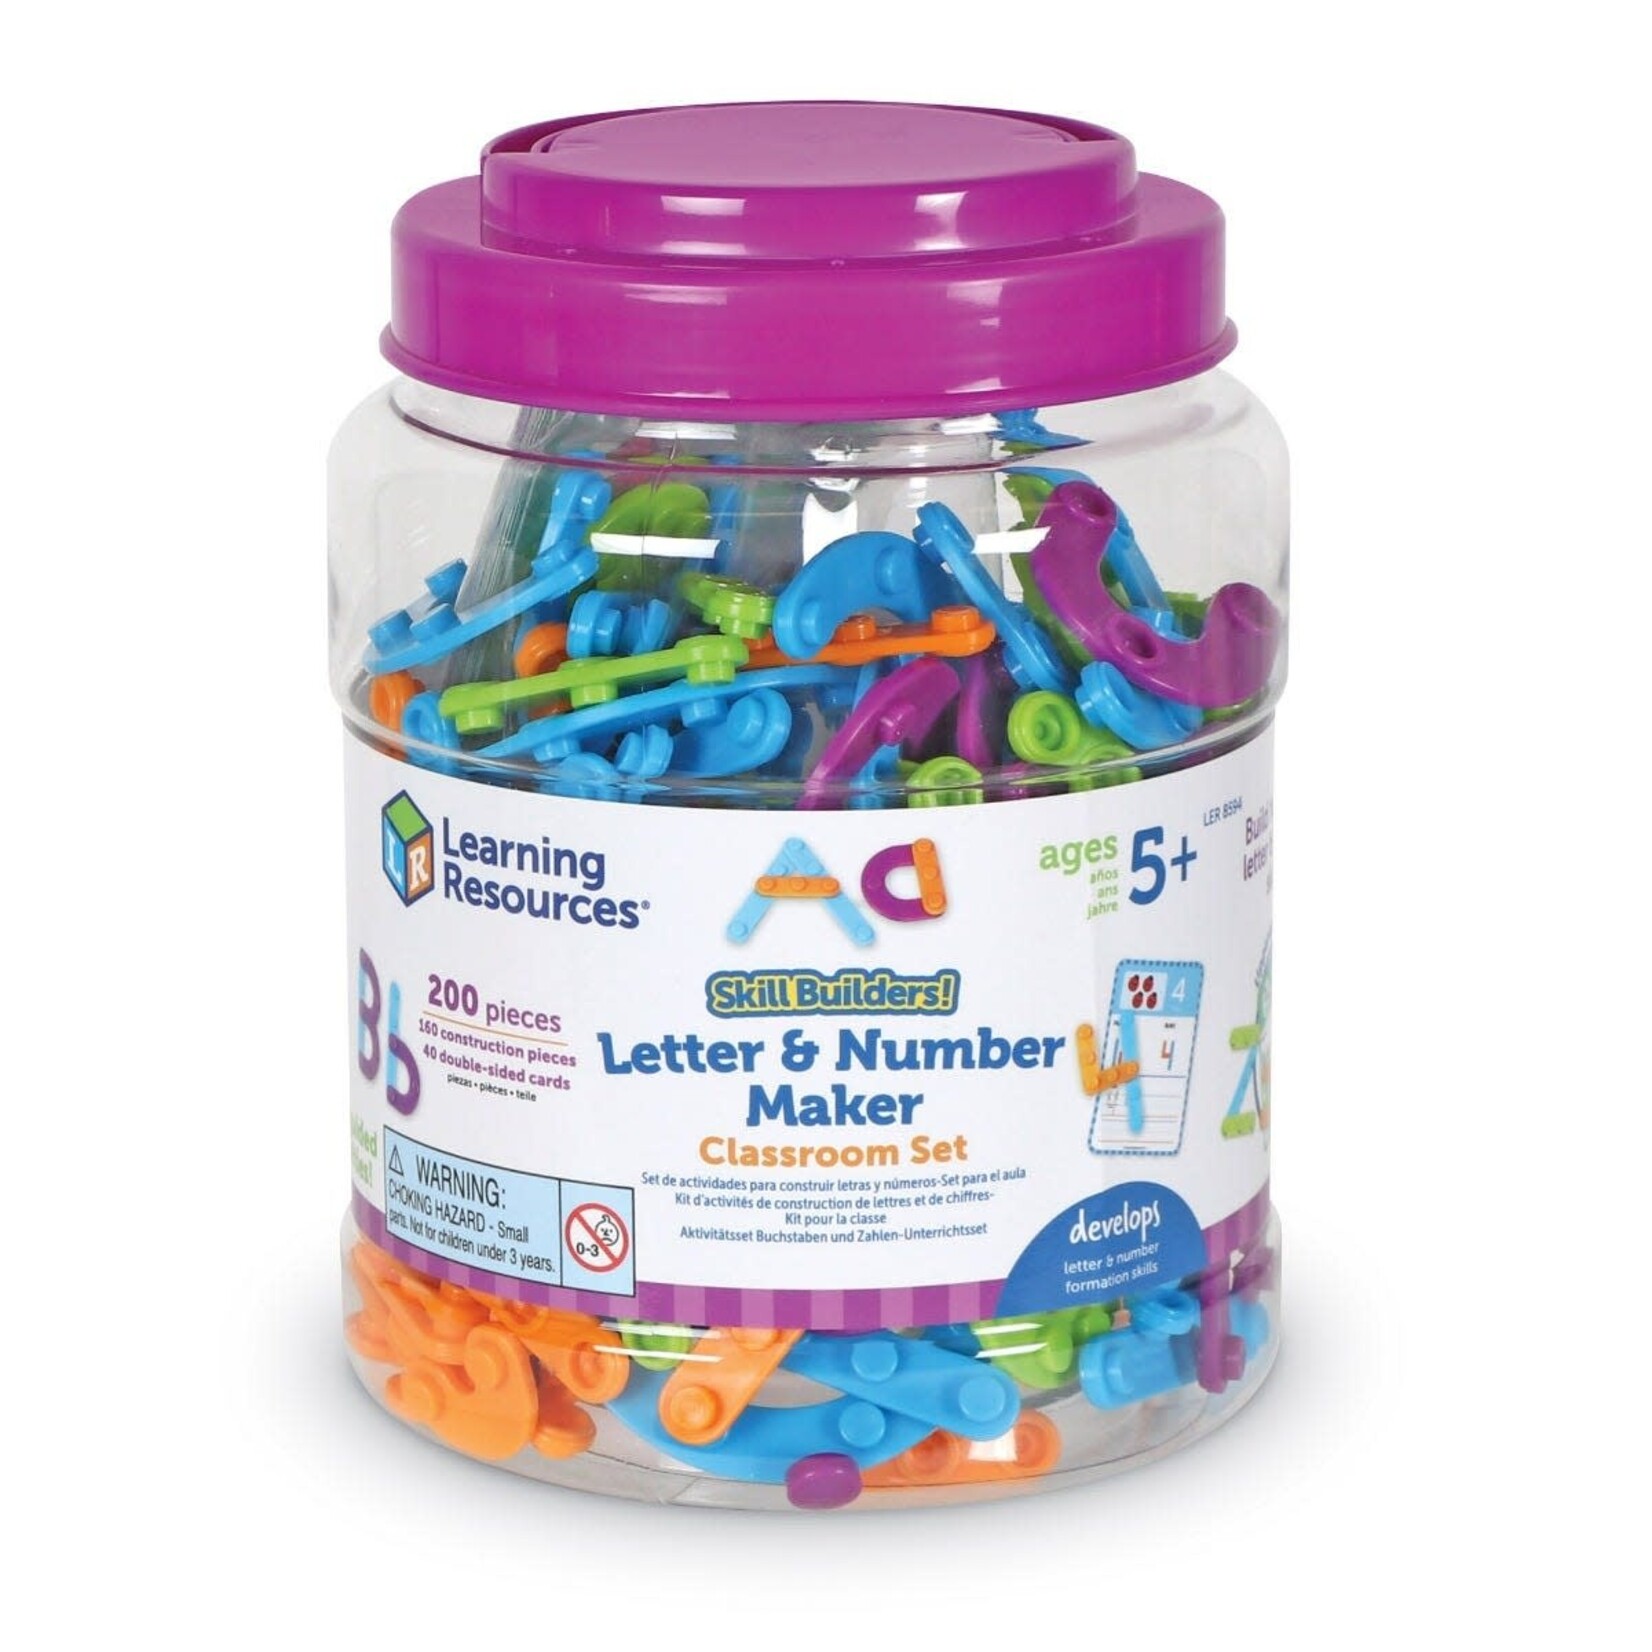 LEARNING RESOURCES INC Skill Builders! Letter and Number Maker Classroom Set